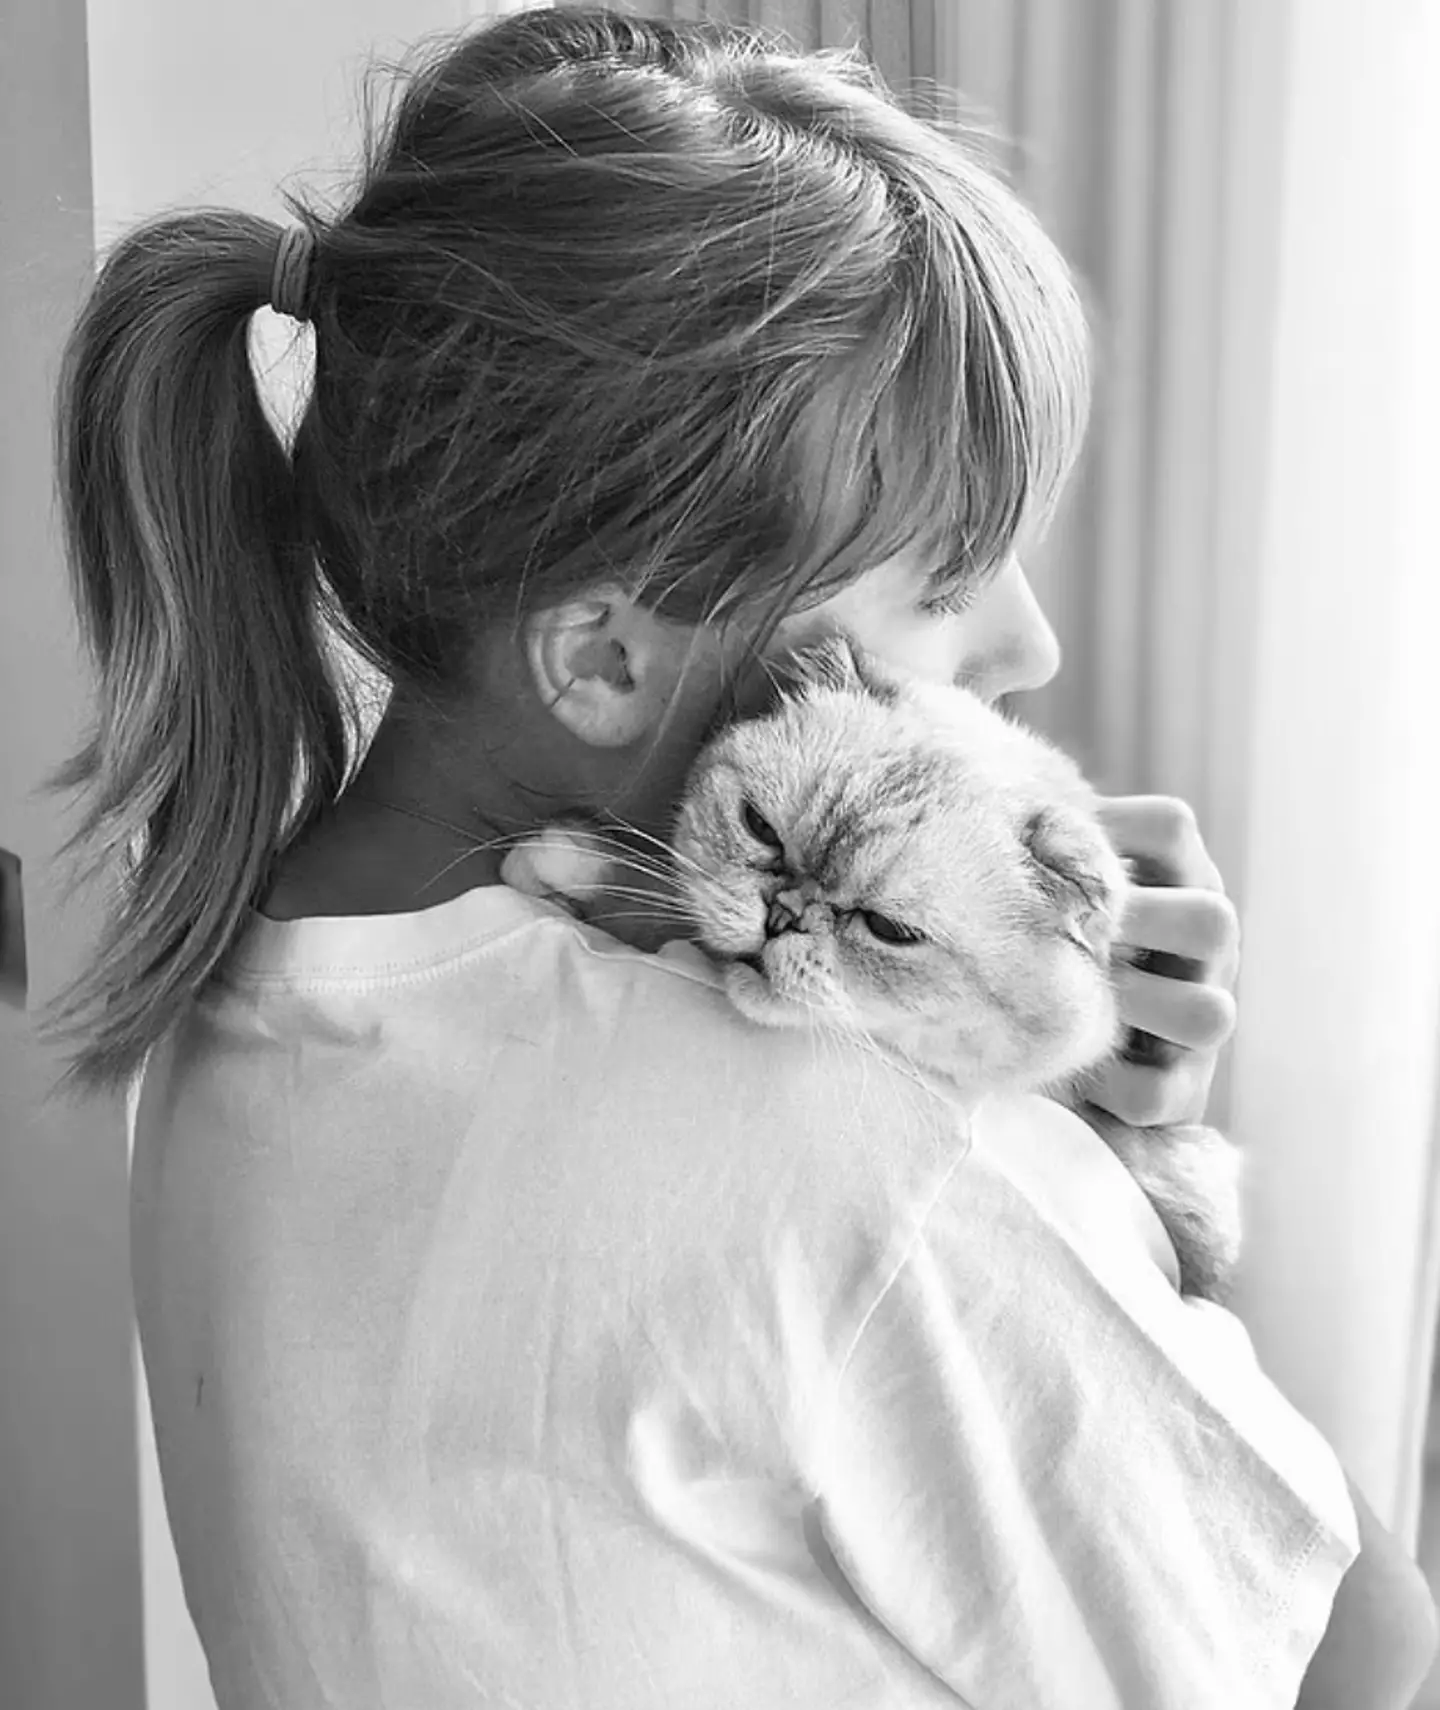 Taylor Swift and her cat Olivia Benson.